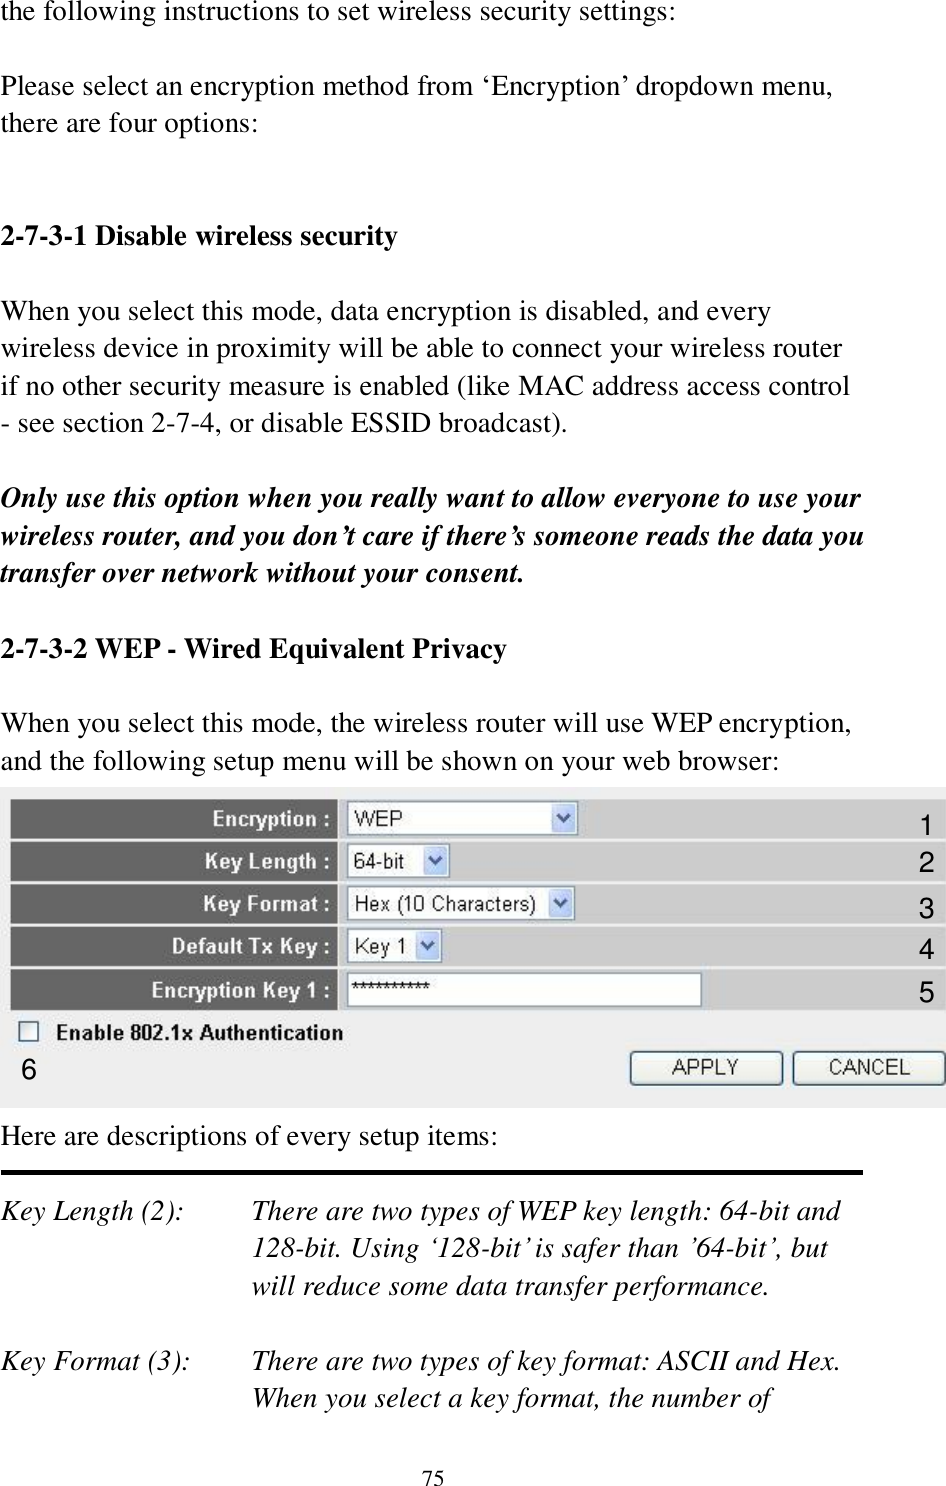 75 the following instructions to set wireless security settings:  Please select an encryption method from „Encryption‟ dropdown menu, there are four options:   2-7-3-1 Disable wireless security  When you select this mode, data encryption is disabled, and every wireless device in proximity will be able to connect your wireless router if no other security measure is enabled (like MAC address access control - see section 2-7-4, or disable ESSID broadcast).    Only use this option when you really want to allow everyone to use your wireless router, and you don’t care if there’s someone reads the data you transfer over network without your consent.  2-7-3-2 WEP - Wired Equivalent Privacy  When you select this mode, the wireless router will use WEP encryption, and the following setup menu will be shown on your web browser:  Here are descriptions of every setup items:  Key Length (2):    There are two types of WEP key length: 64-bit and 128-bit. Using „128-bit‟ is safer than ‟64-bit‟, but will reduce some data transfer performance.  Key Format (3):    There are two types of key format: ASCII and Hex. When you select a key format, the number of 1 2 3 5 6 4 